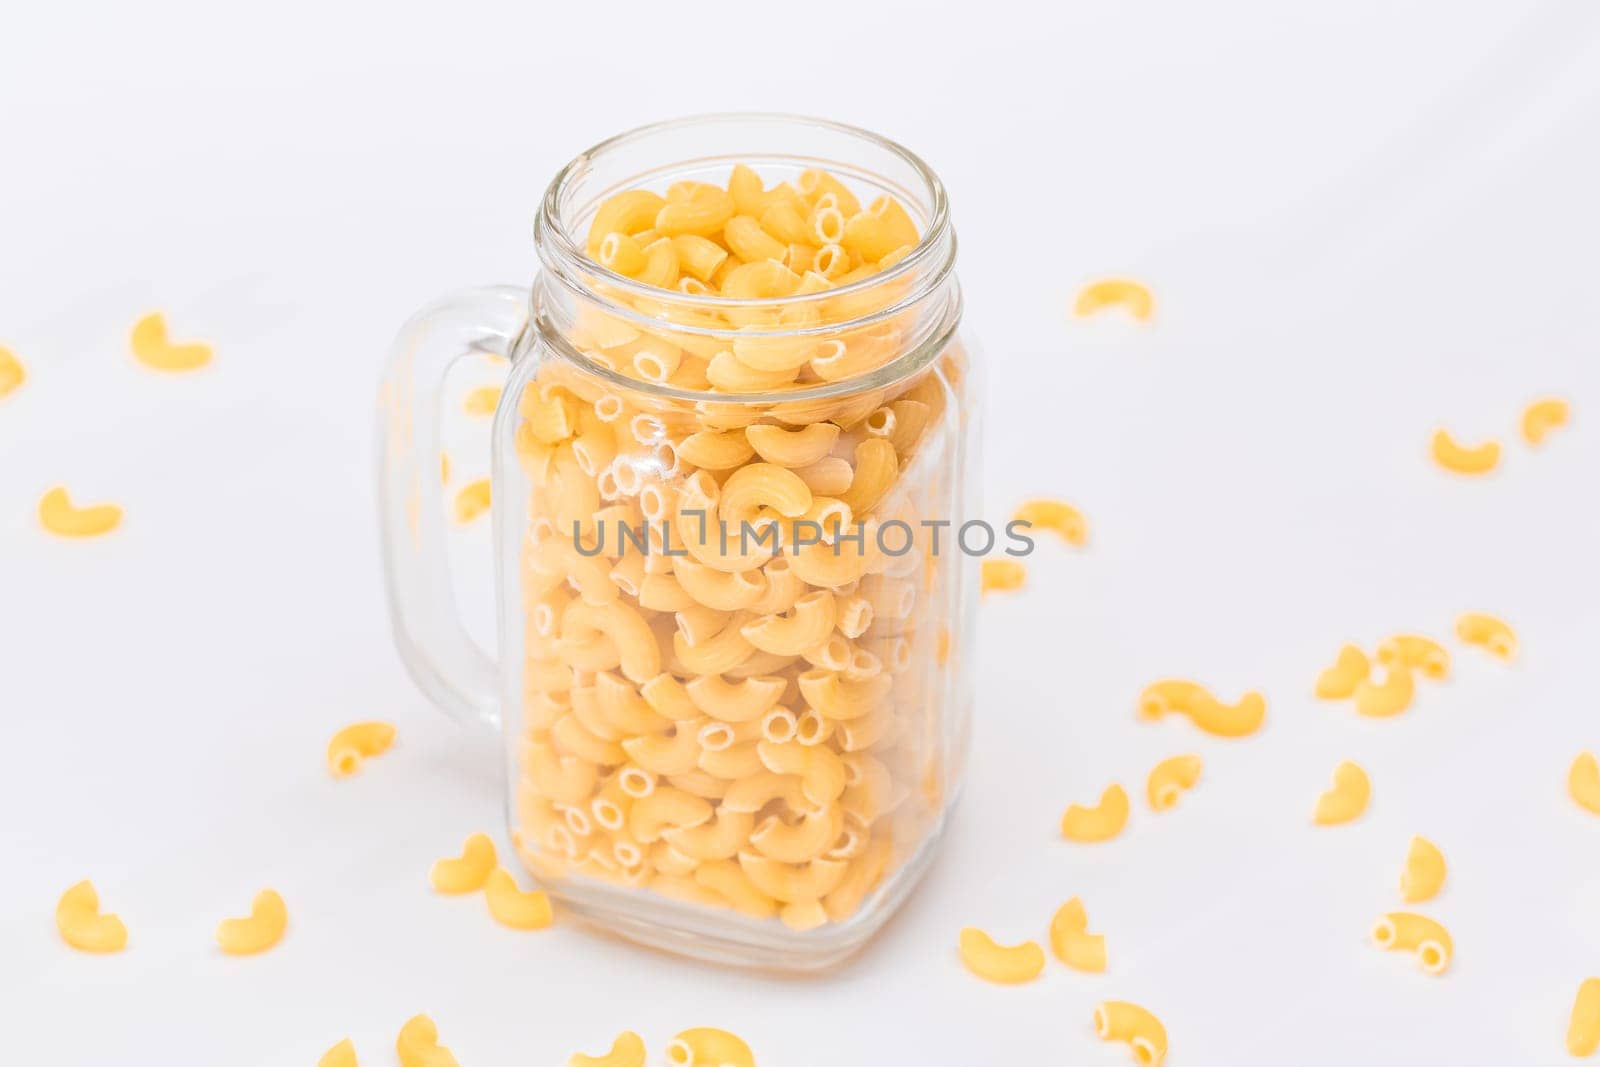 Uncooked Chifferi Rigati Pasta in Glass Jar on White Background. Fat and Unhealthy Food. Scattered Classic Dry Macaroni. Italian Culture and Cuisine. Raw Pasta